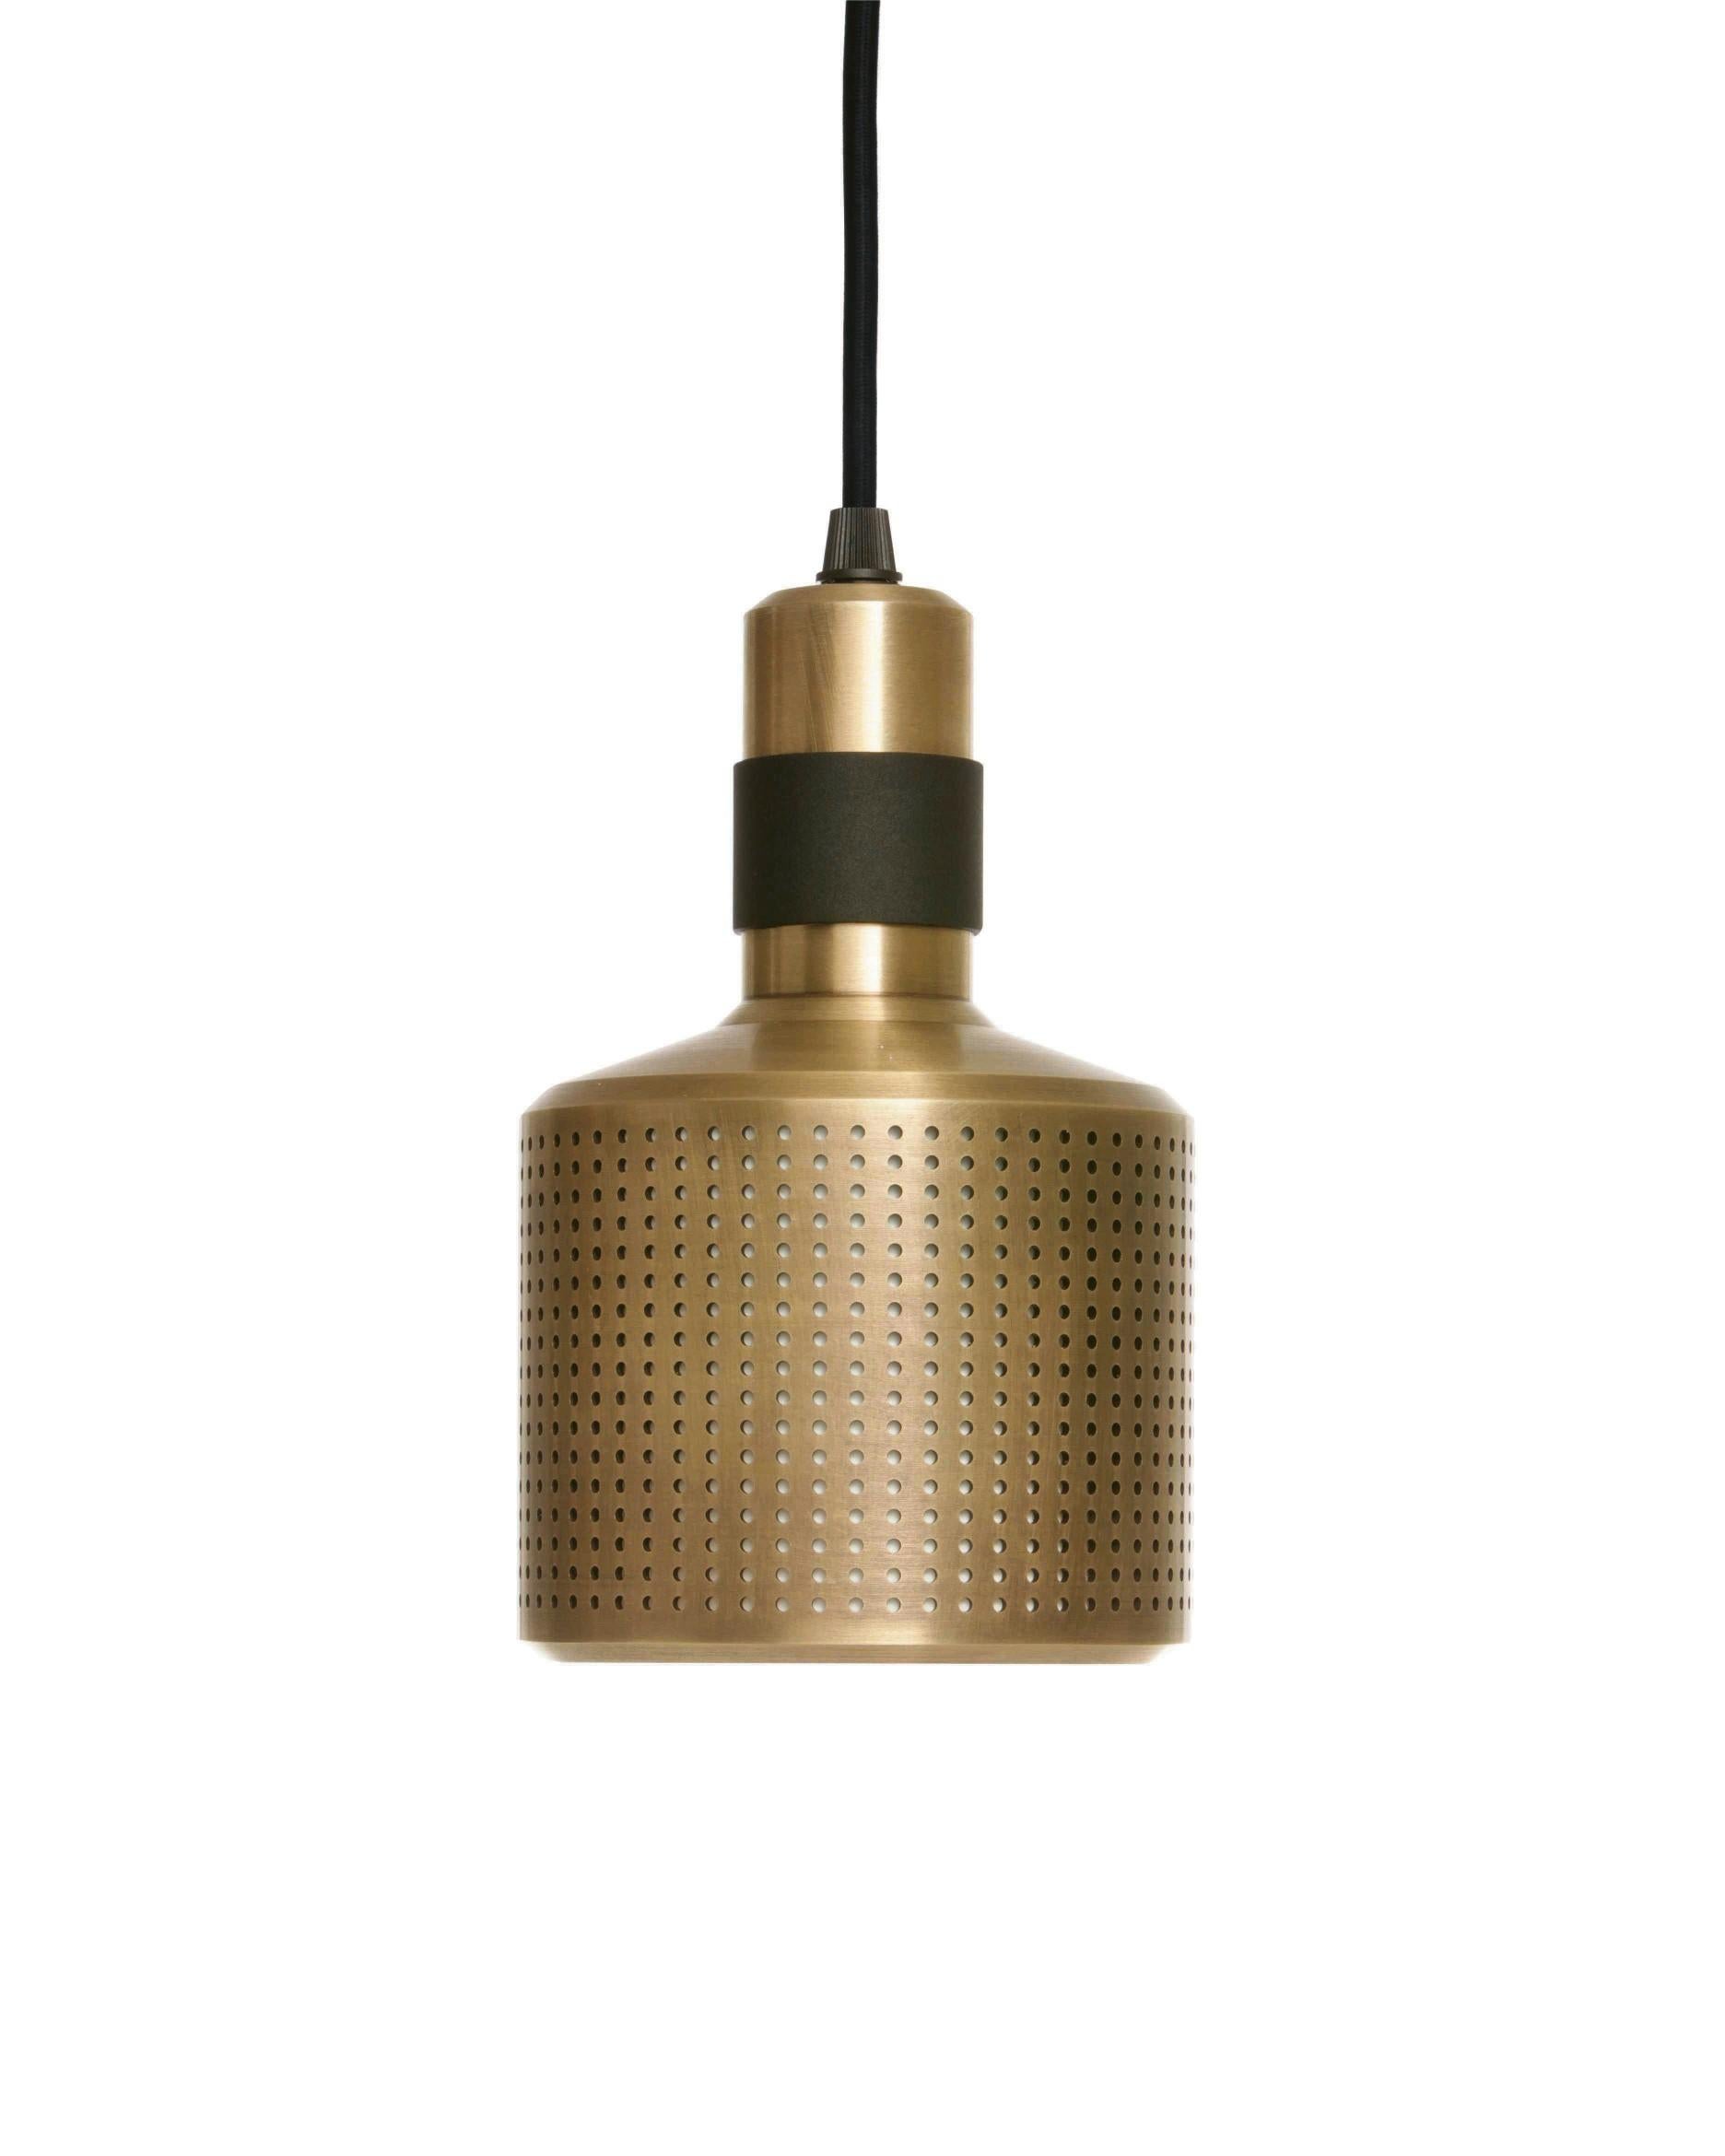 Brass riddle pendant by Bert Frank
Dimensions: H 20 x W 12 x D 12 cm
Materials: Brass and steel

Available finishes: Brass and black
All our lamps can be wired according to each country. If sold to the USA it will be wired for the USA for